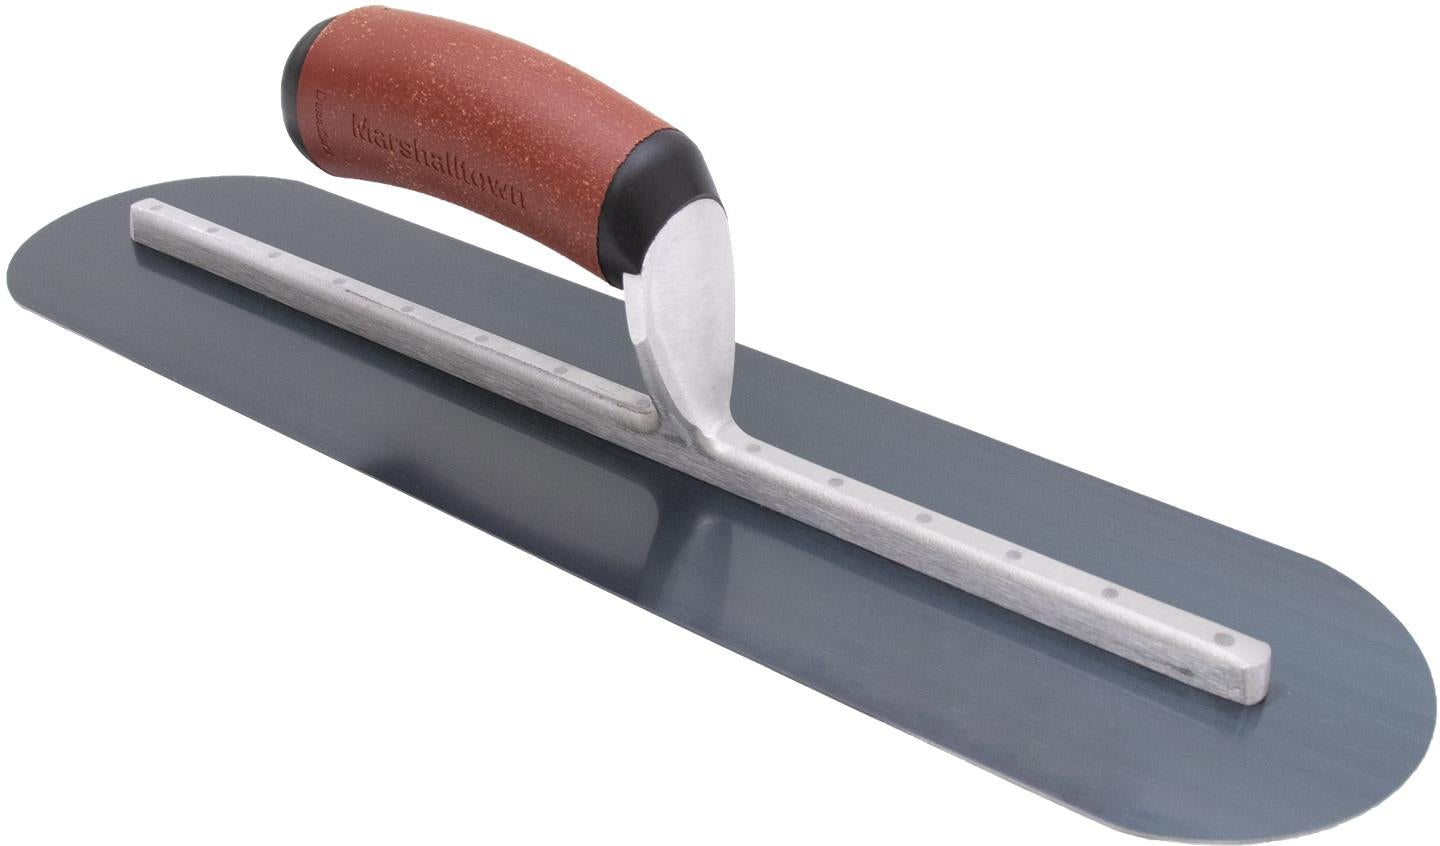 Marshalltown  MXS20BRDC- 20 X 4 BS Fully Rounded Finishing Trowel - DuraCork Handle